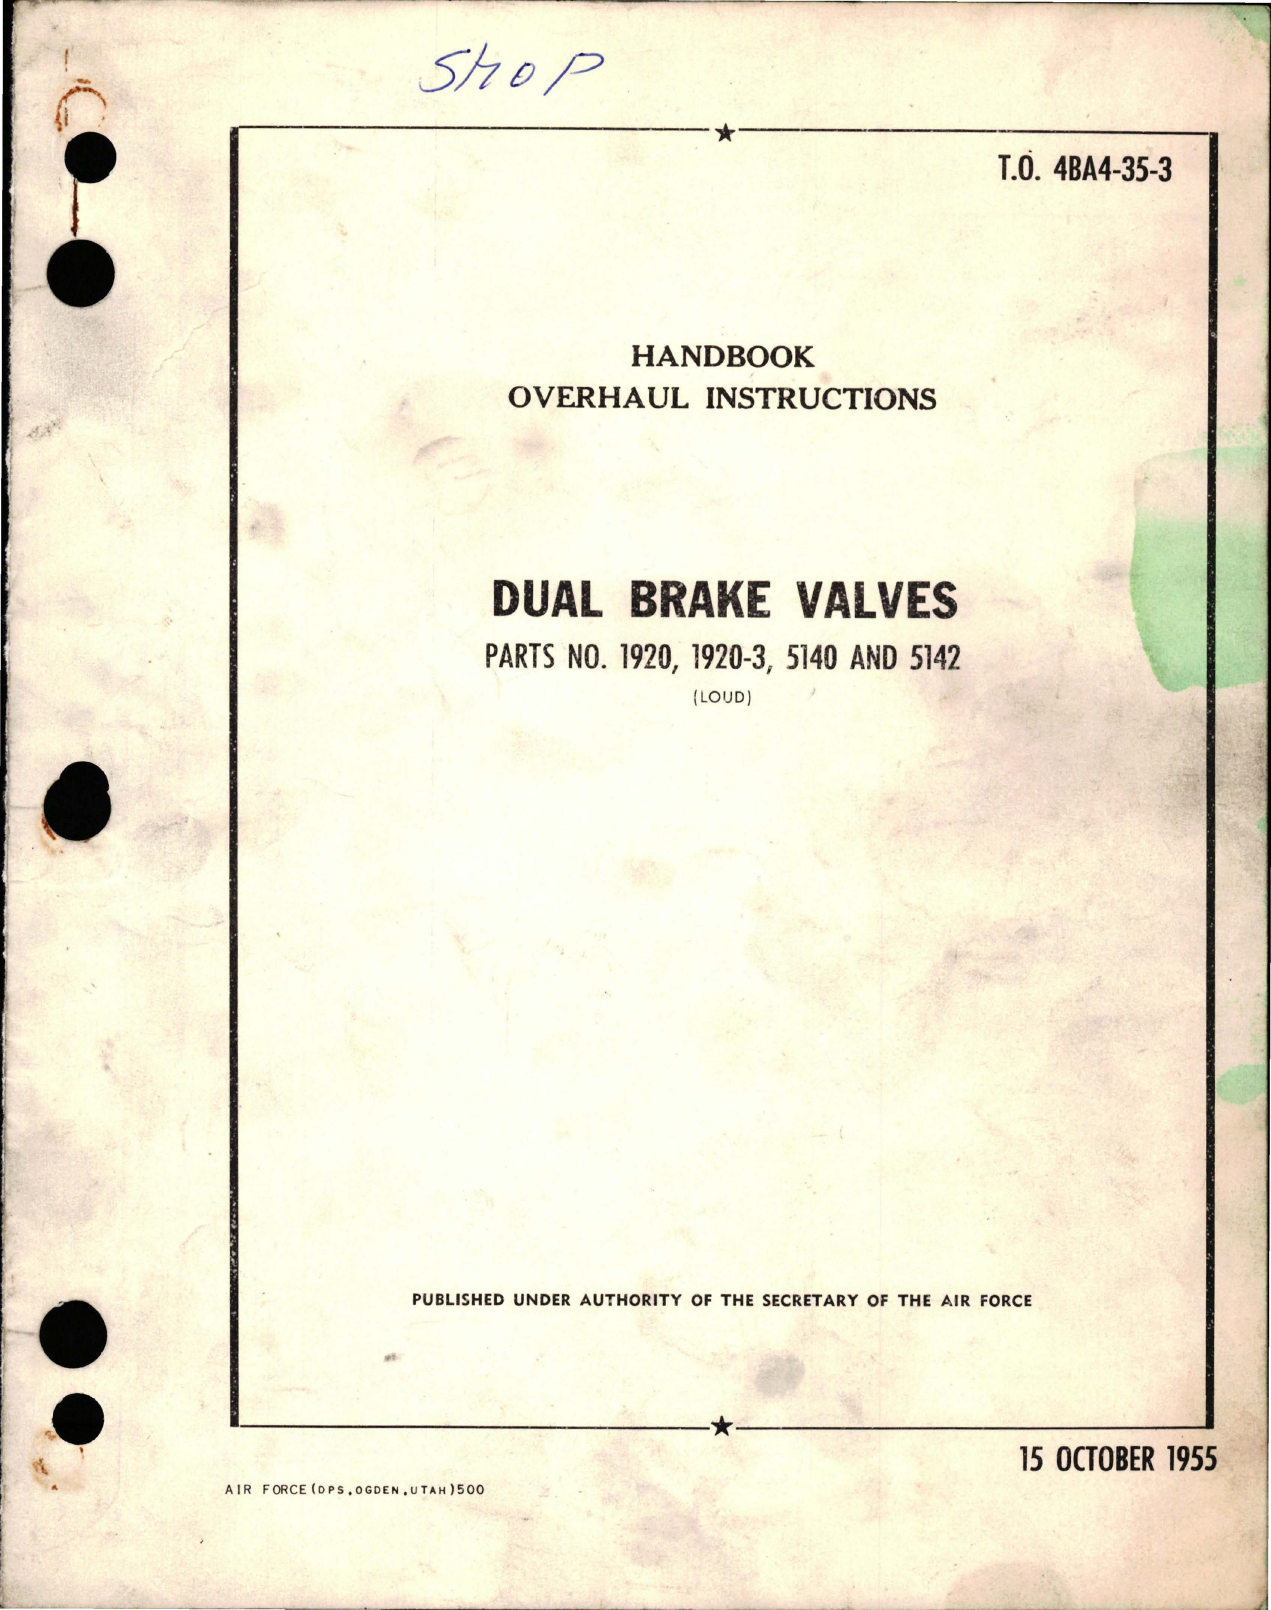 Sample page 1 from AirCorps Library document: Overhaul Instructions for Dual Brake Valves - Parts 1920, 1920-3, 5140, and 5142 